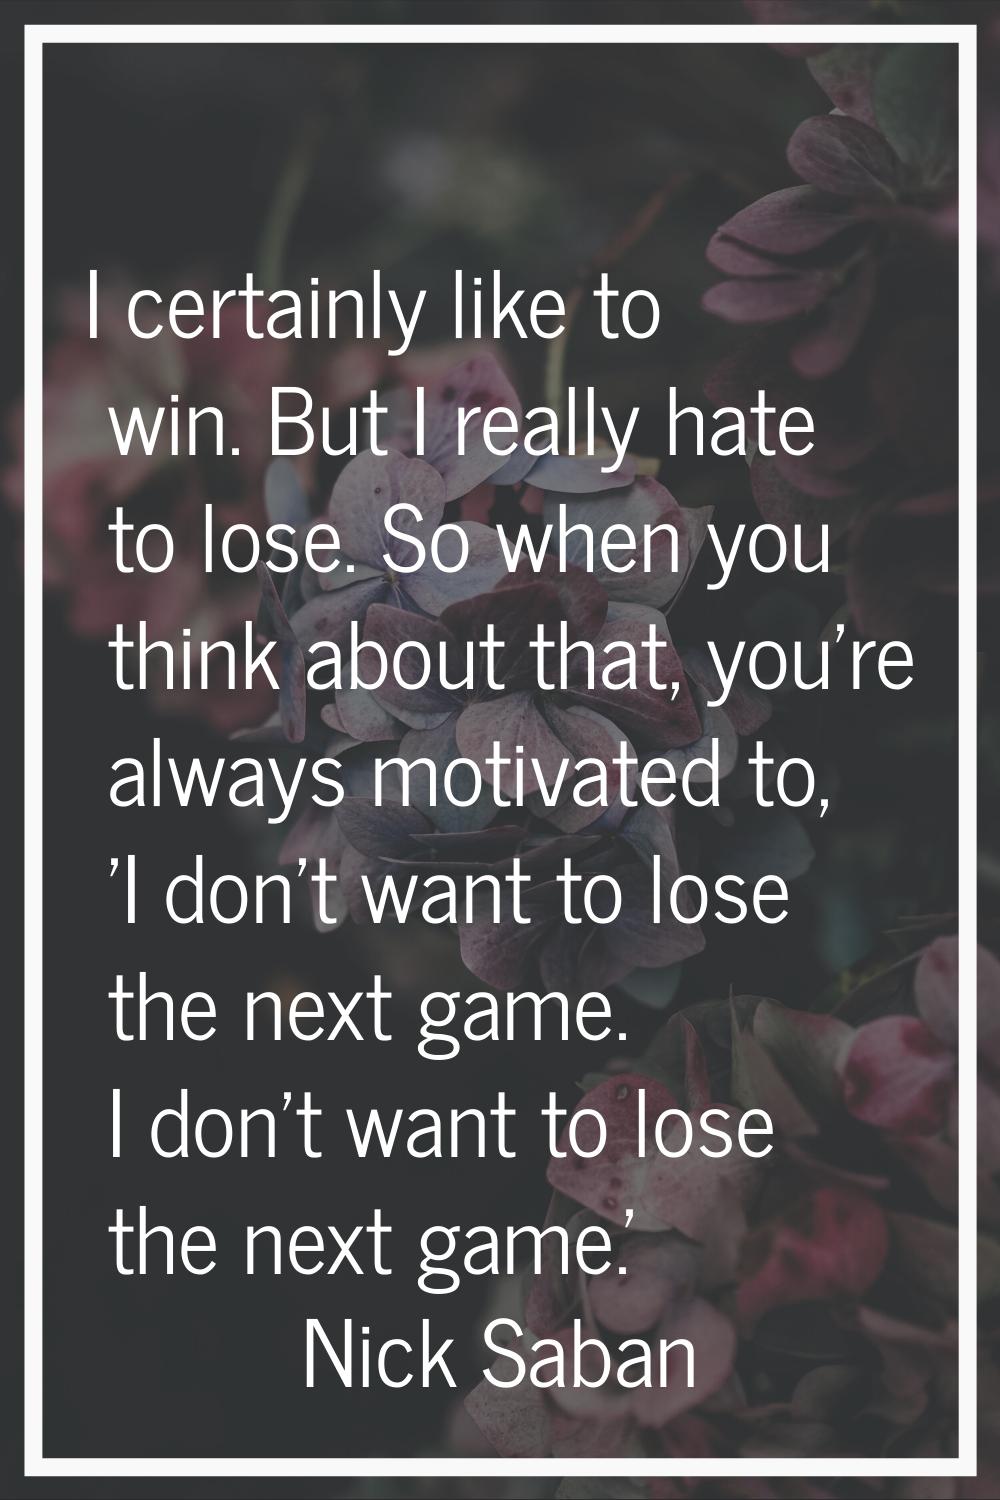 I certainly like to win. But I really hate to lose. So when you think about that, you're always mot